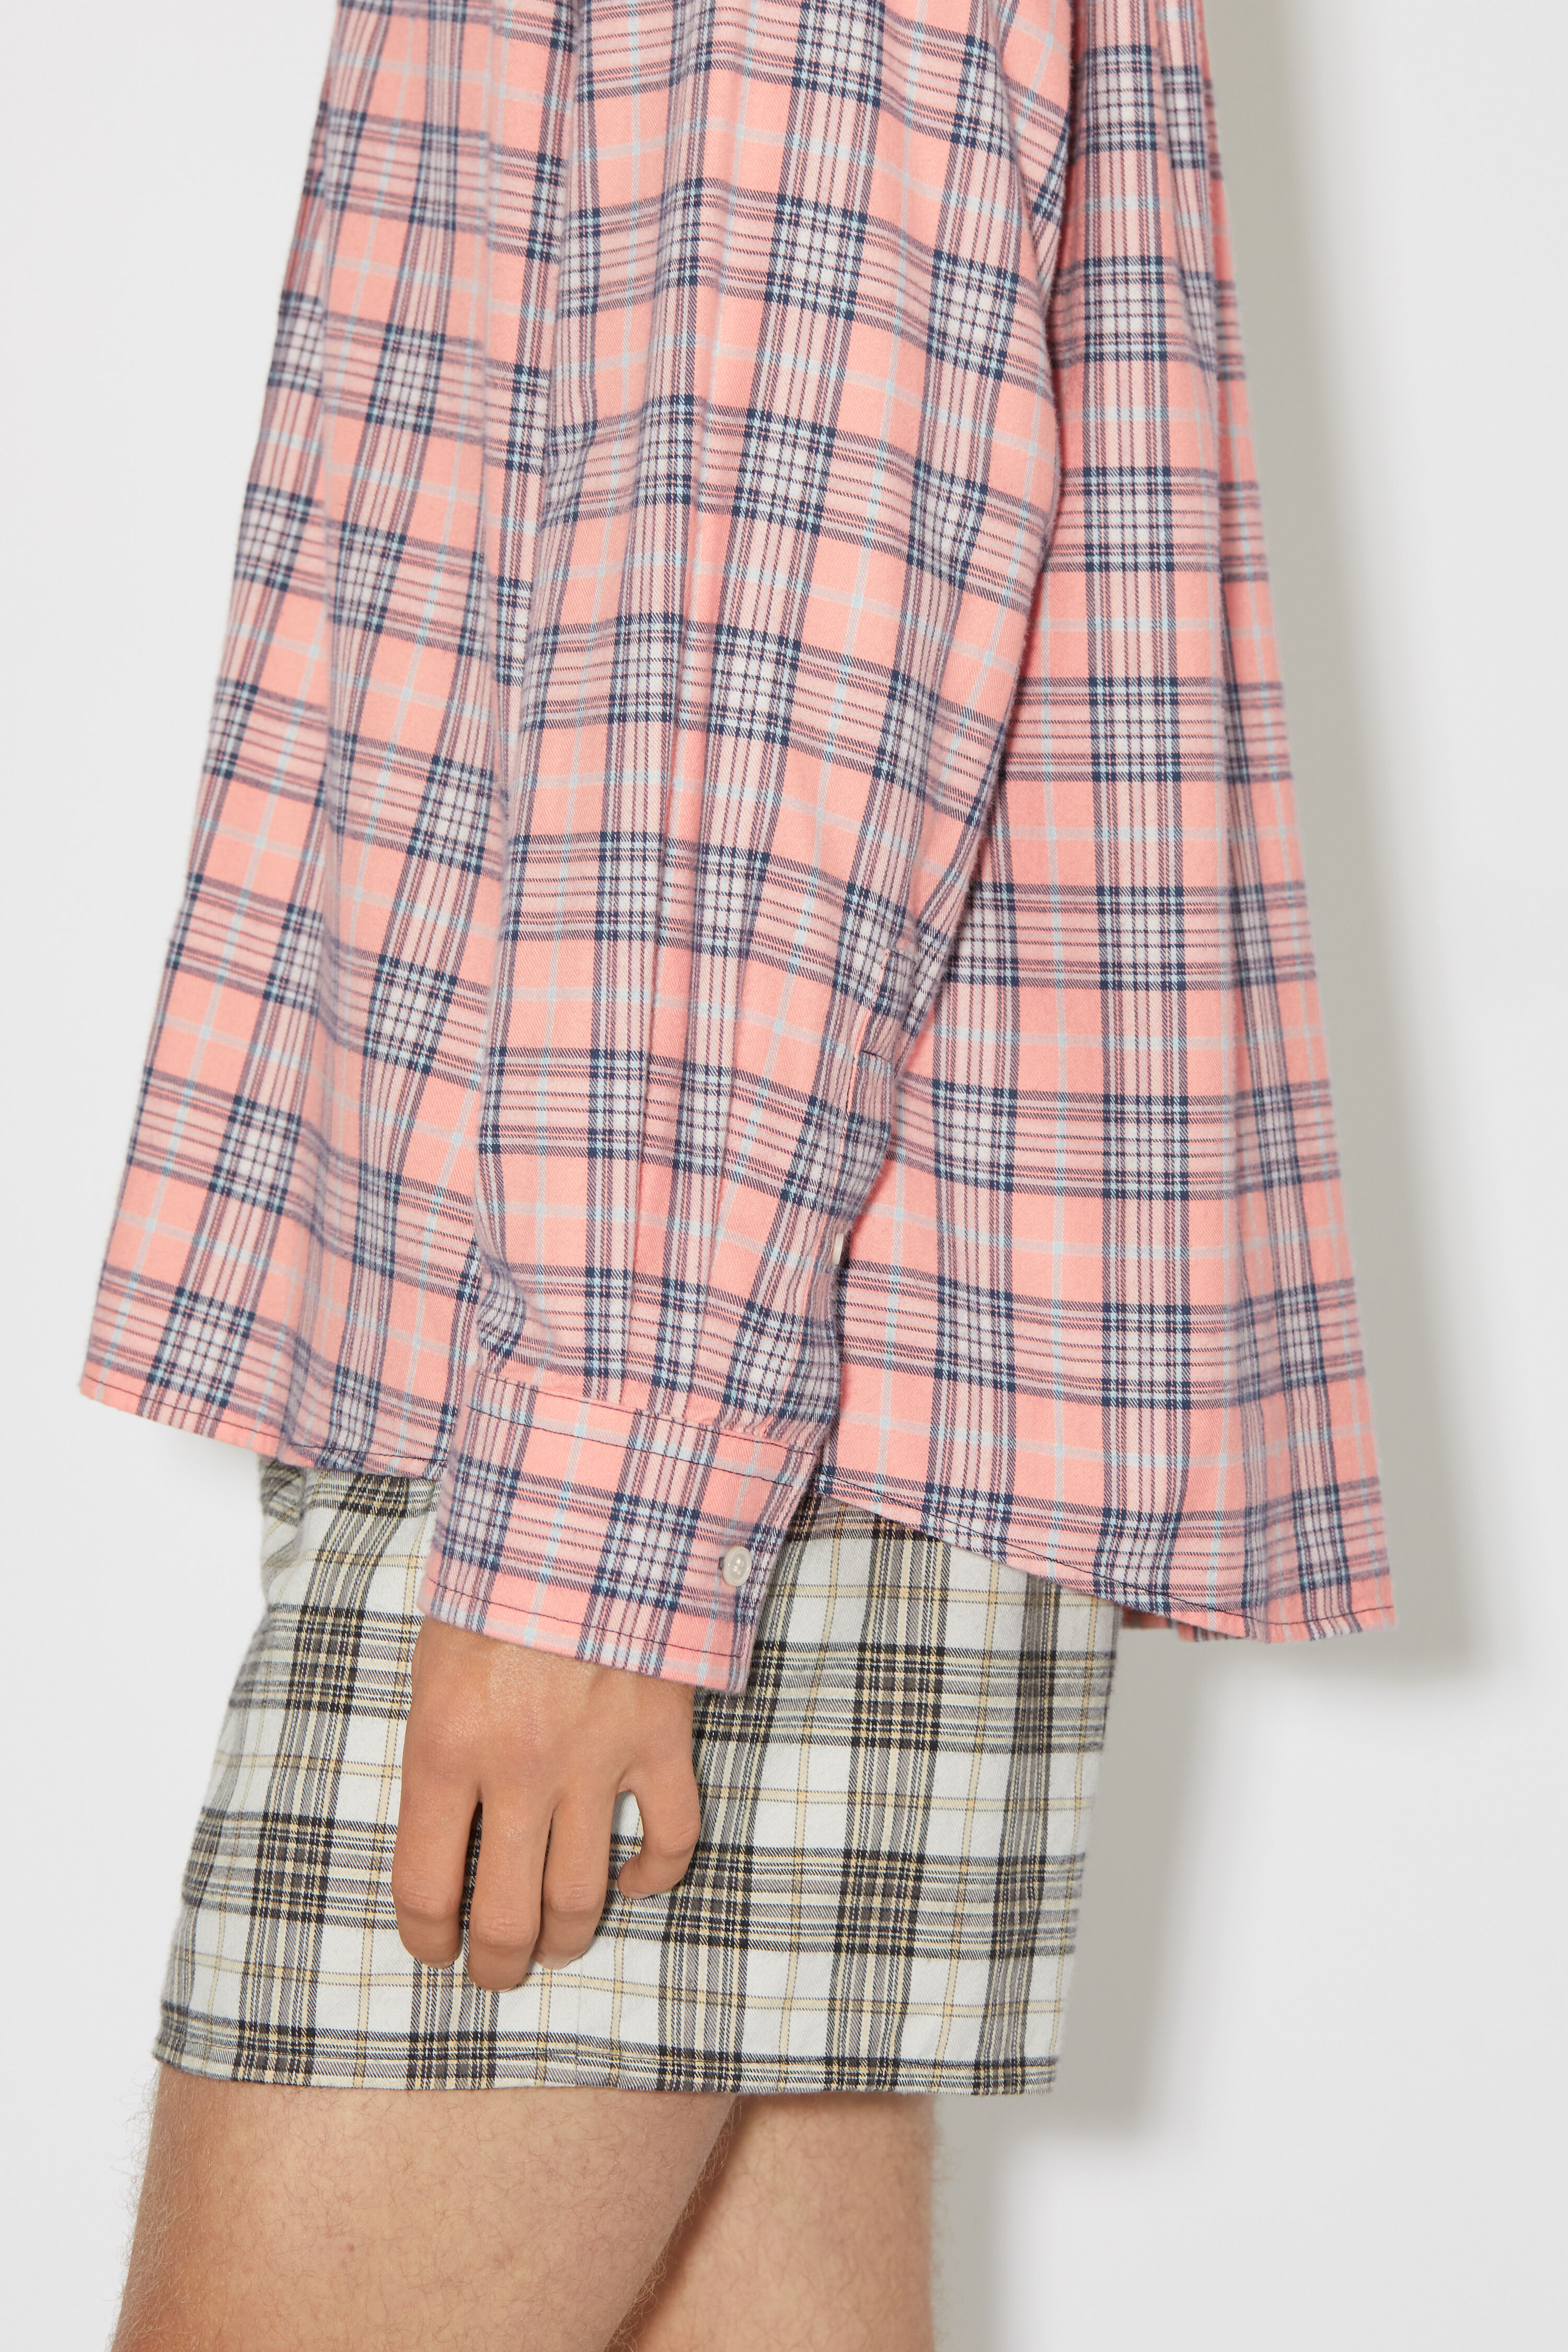 Acne Studios - Flannel check button-up shirt - Pink/blue